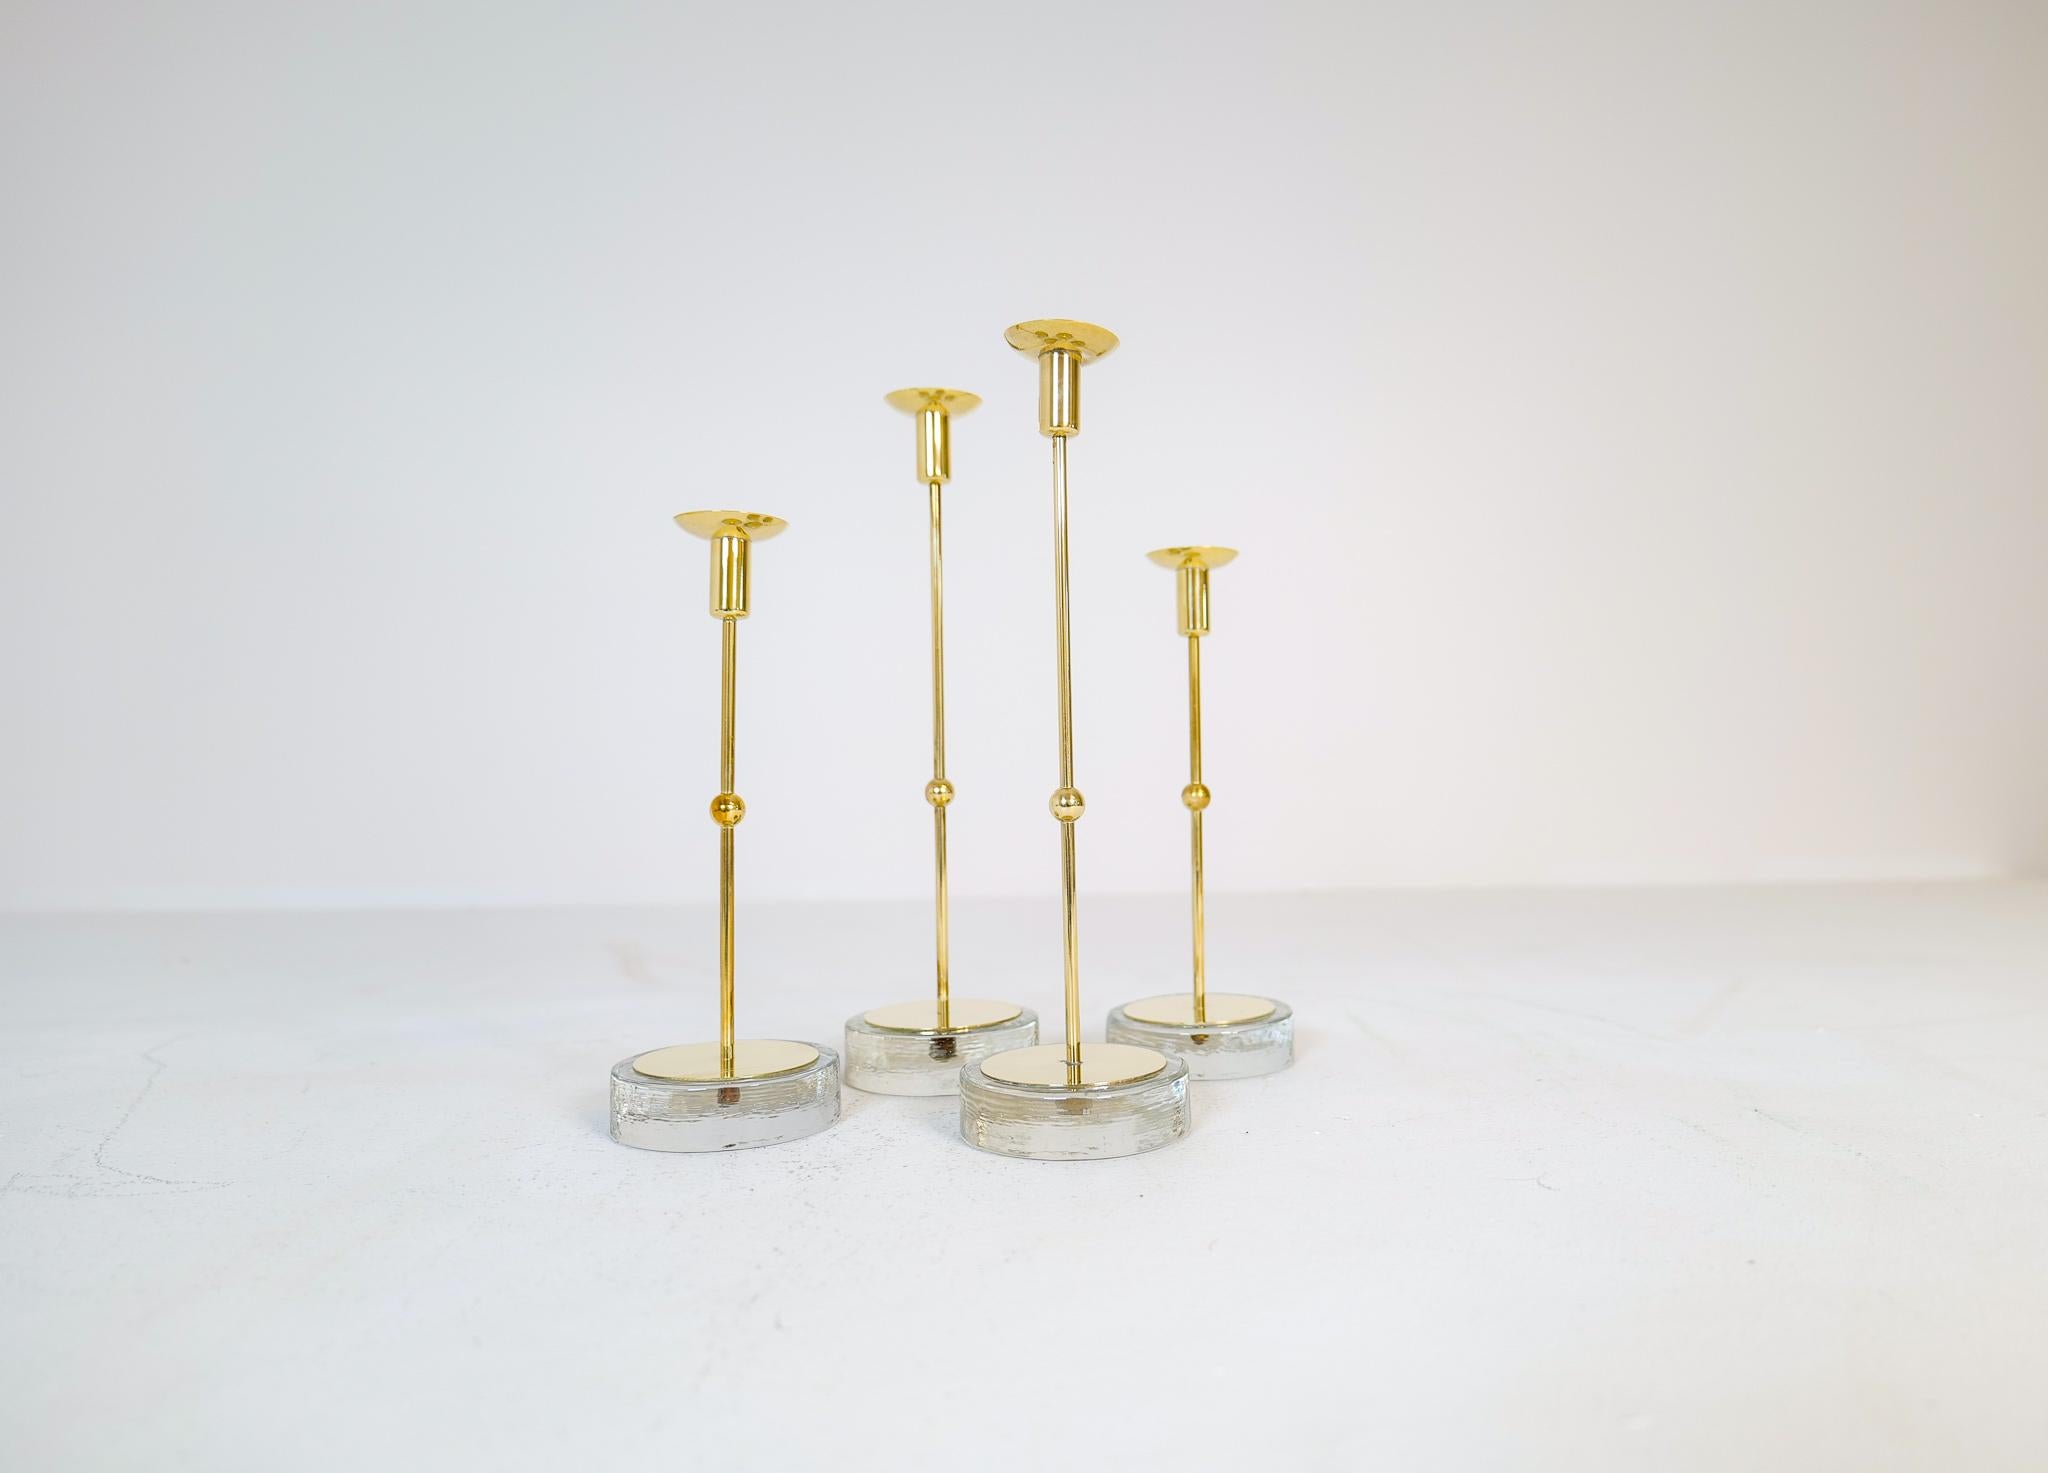 This set of 4 candleholder was designed in Sweden at Ystad Metall and by Gunnar Ander in the 1950s. 
The base is made of glass and the holder in brass. The pieces give that look of Swedish modern design. They are made to hold small candles and are